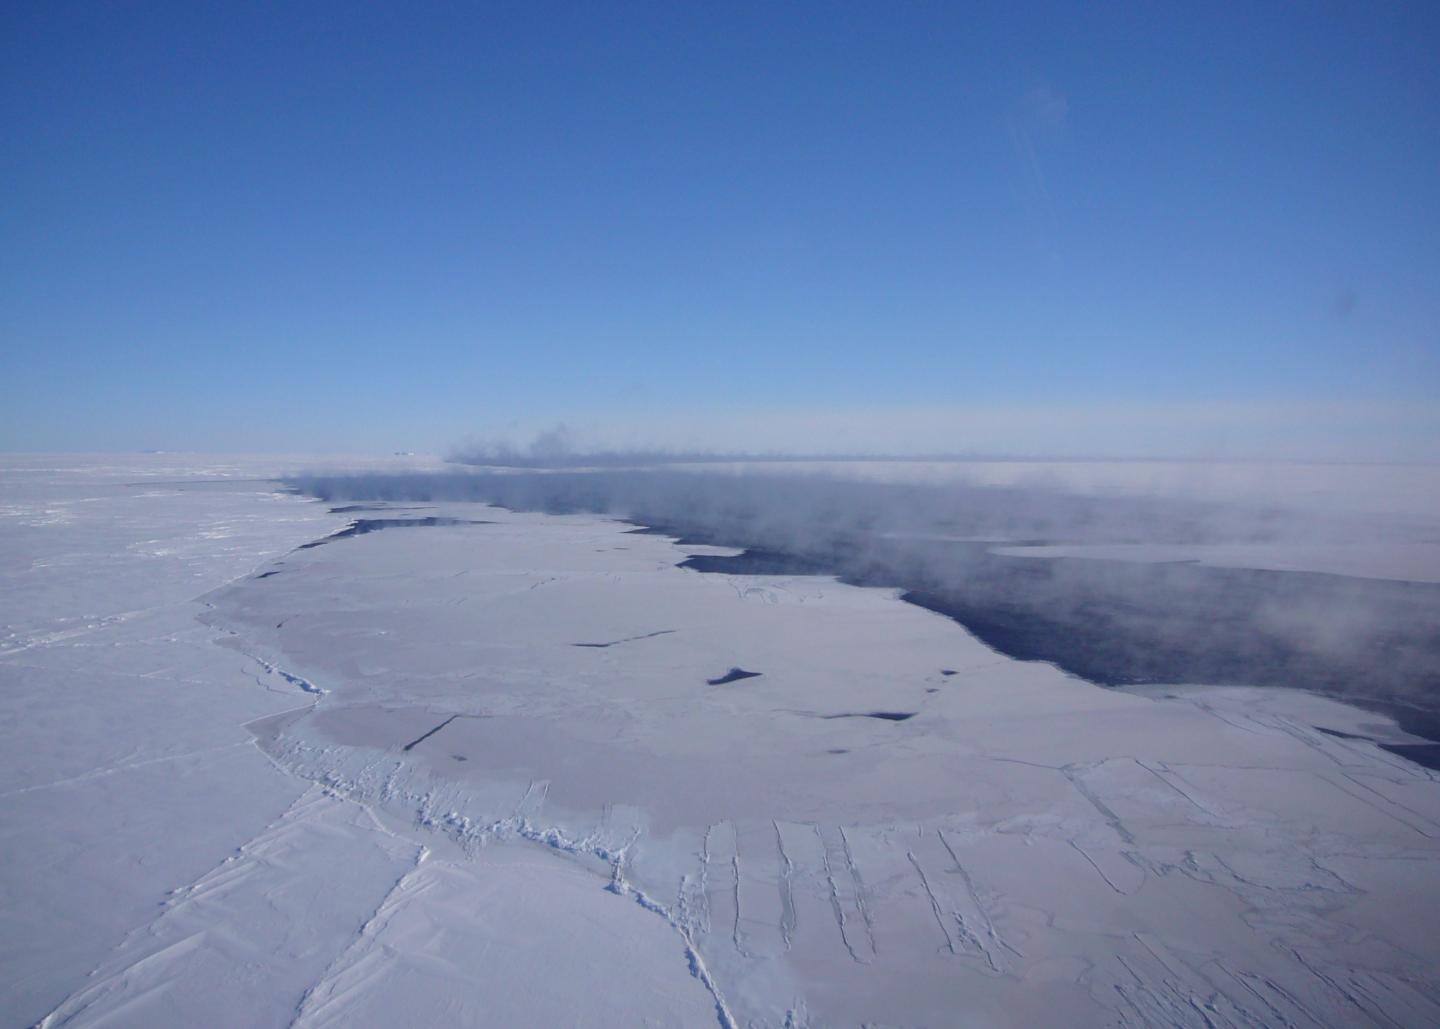 Aerial View of the Polynya in the Southern Ocean